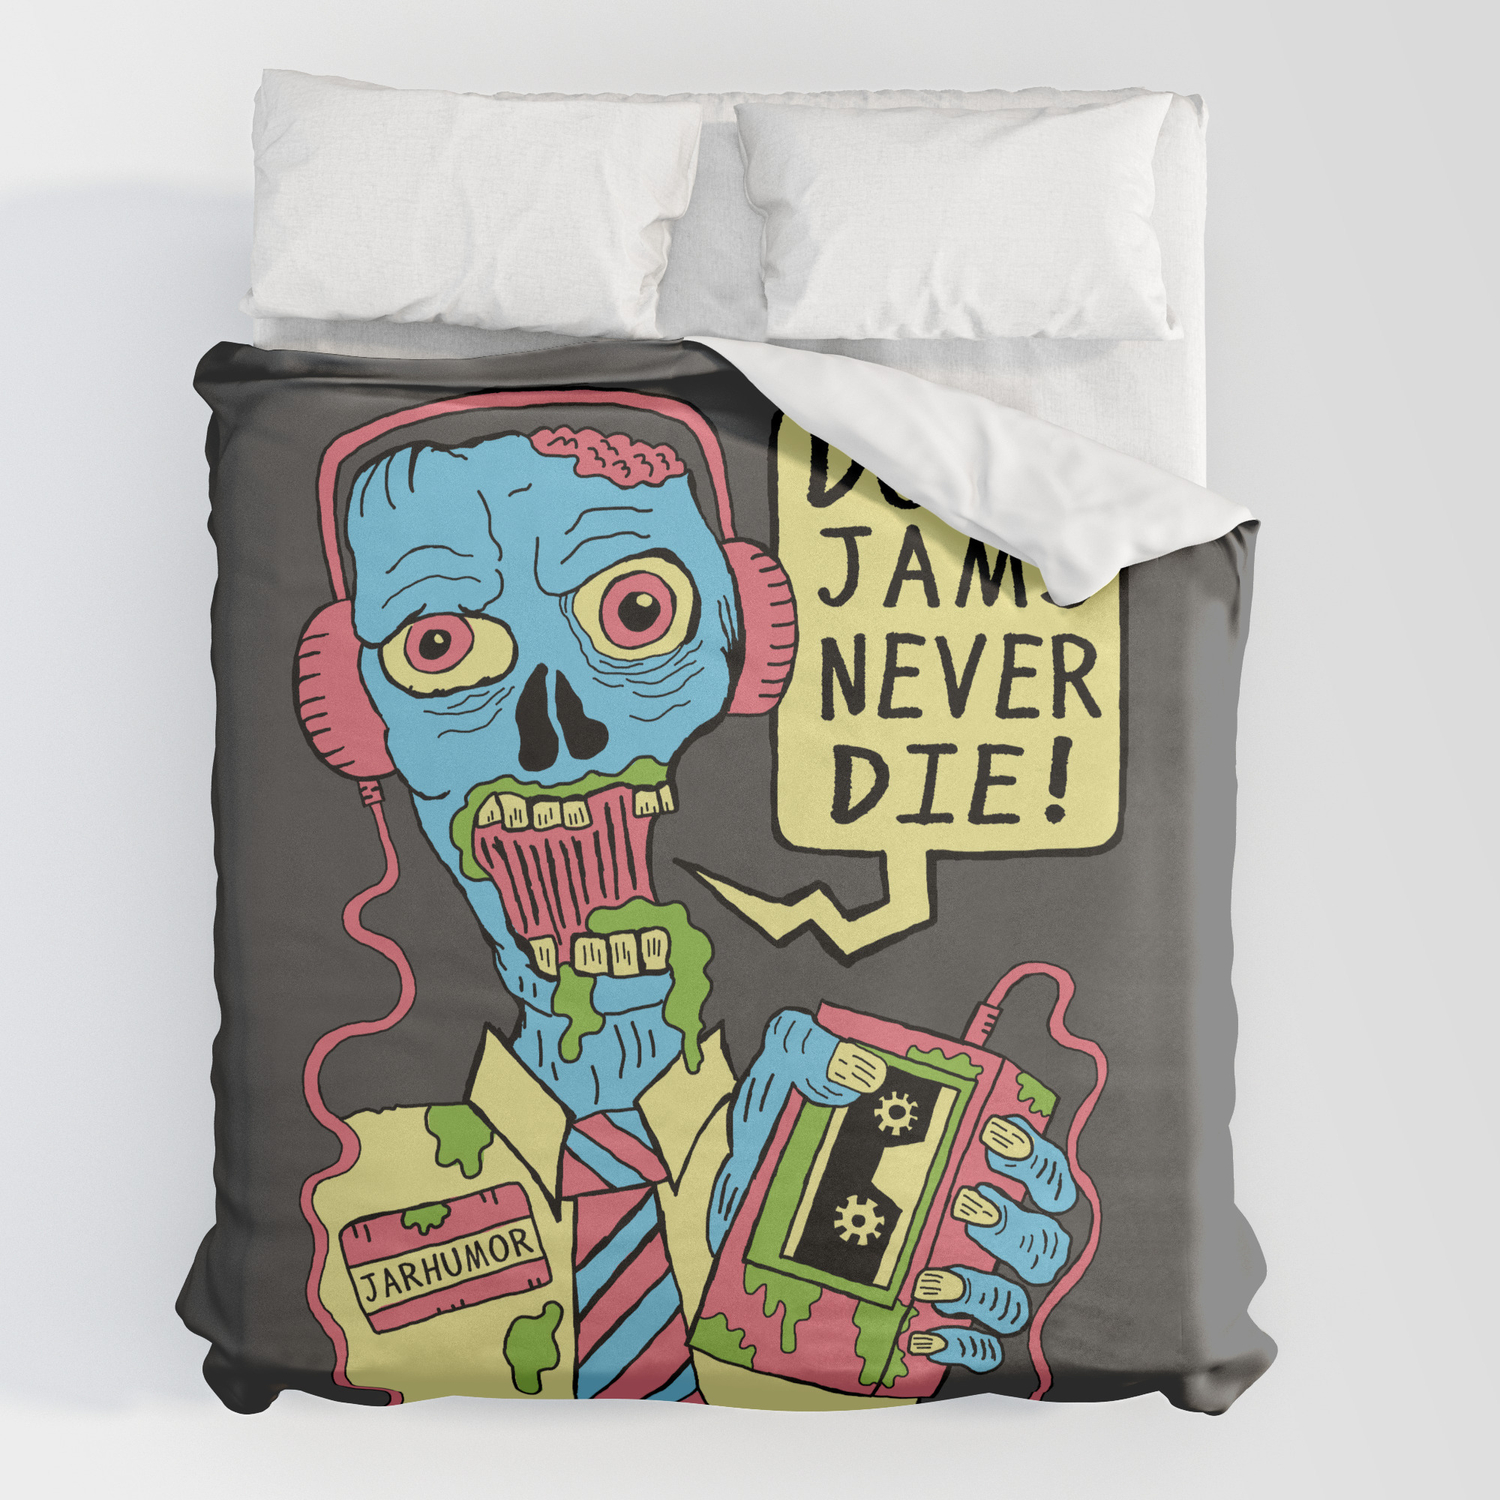 Dope Jams Zombie Duvet Cover By, Zombie Duvet Cover